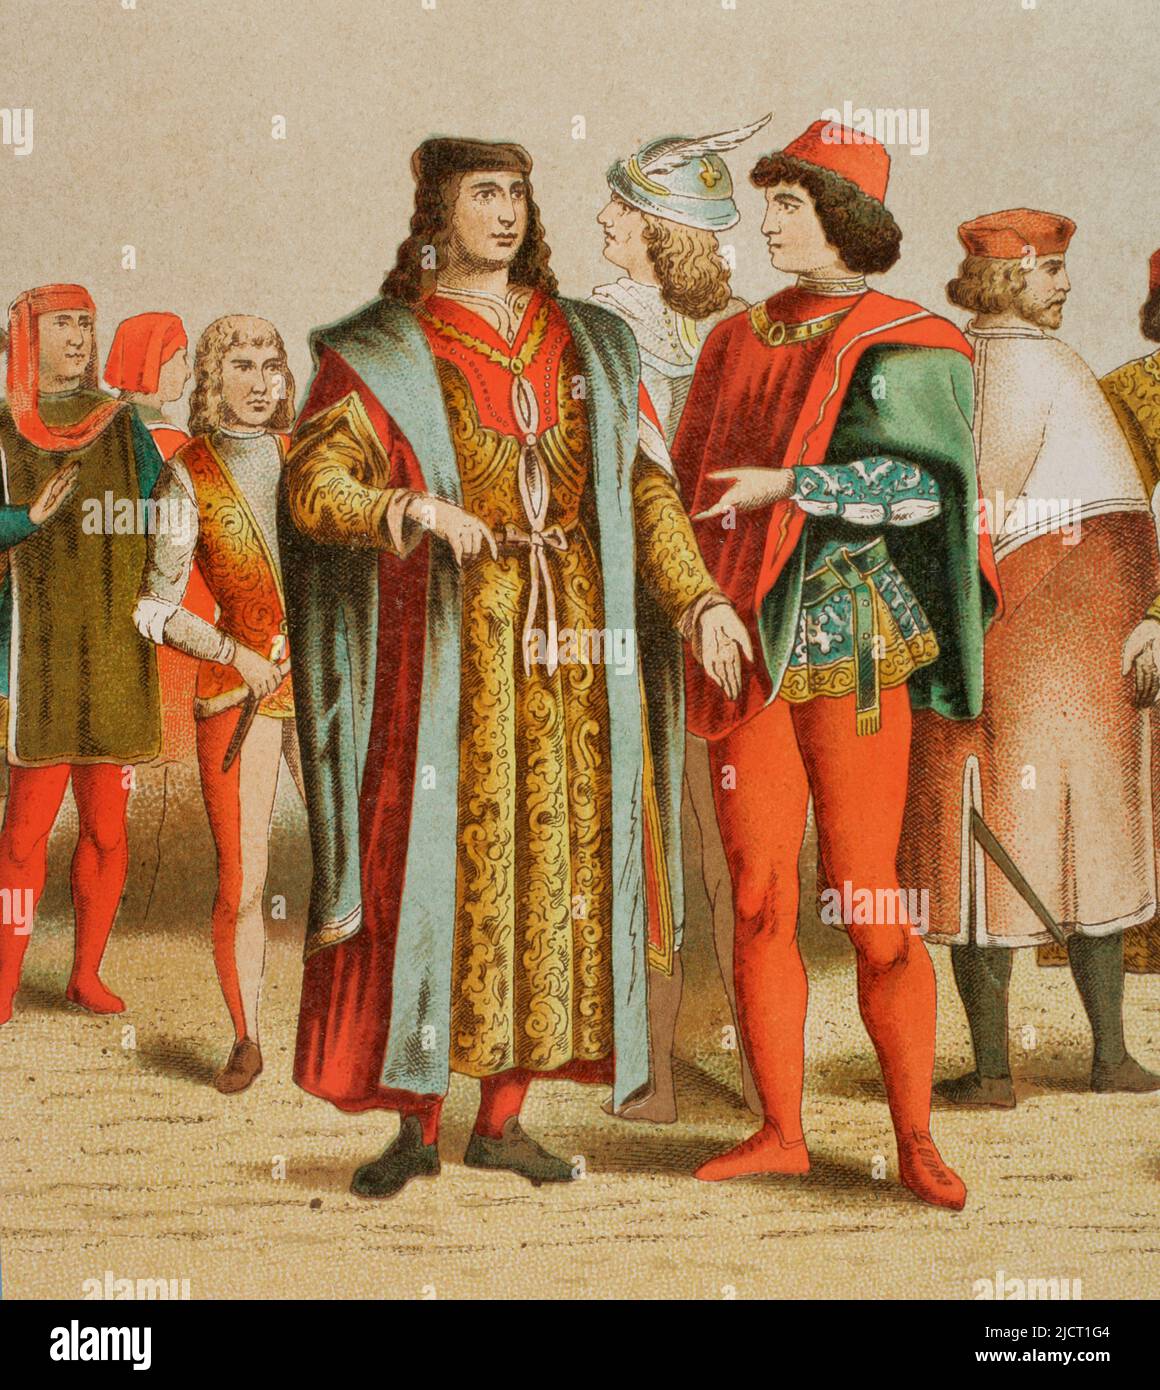 From left to right: Florentines, page, noblemen and Venetian noblemen. Chromolithography. 'Historia Universal' (Universal History), by César Cantú. Volume VI. Published in Barcelona, 1885. Stock Photo